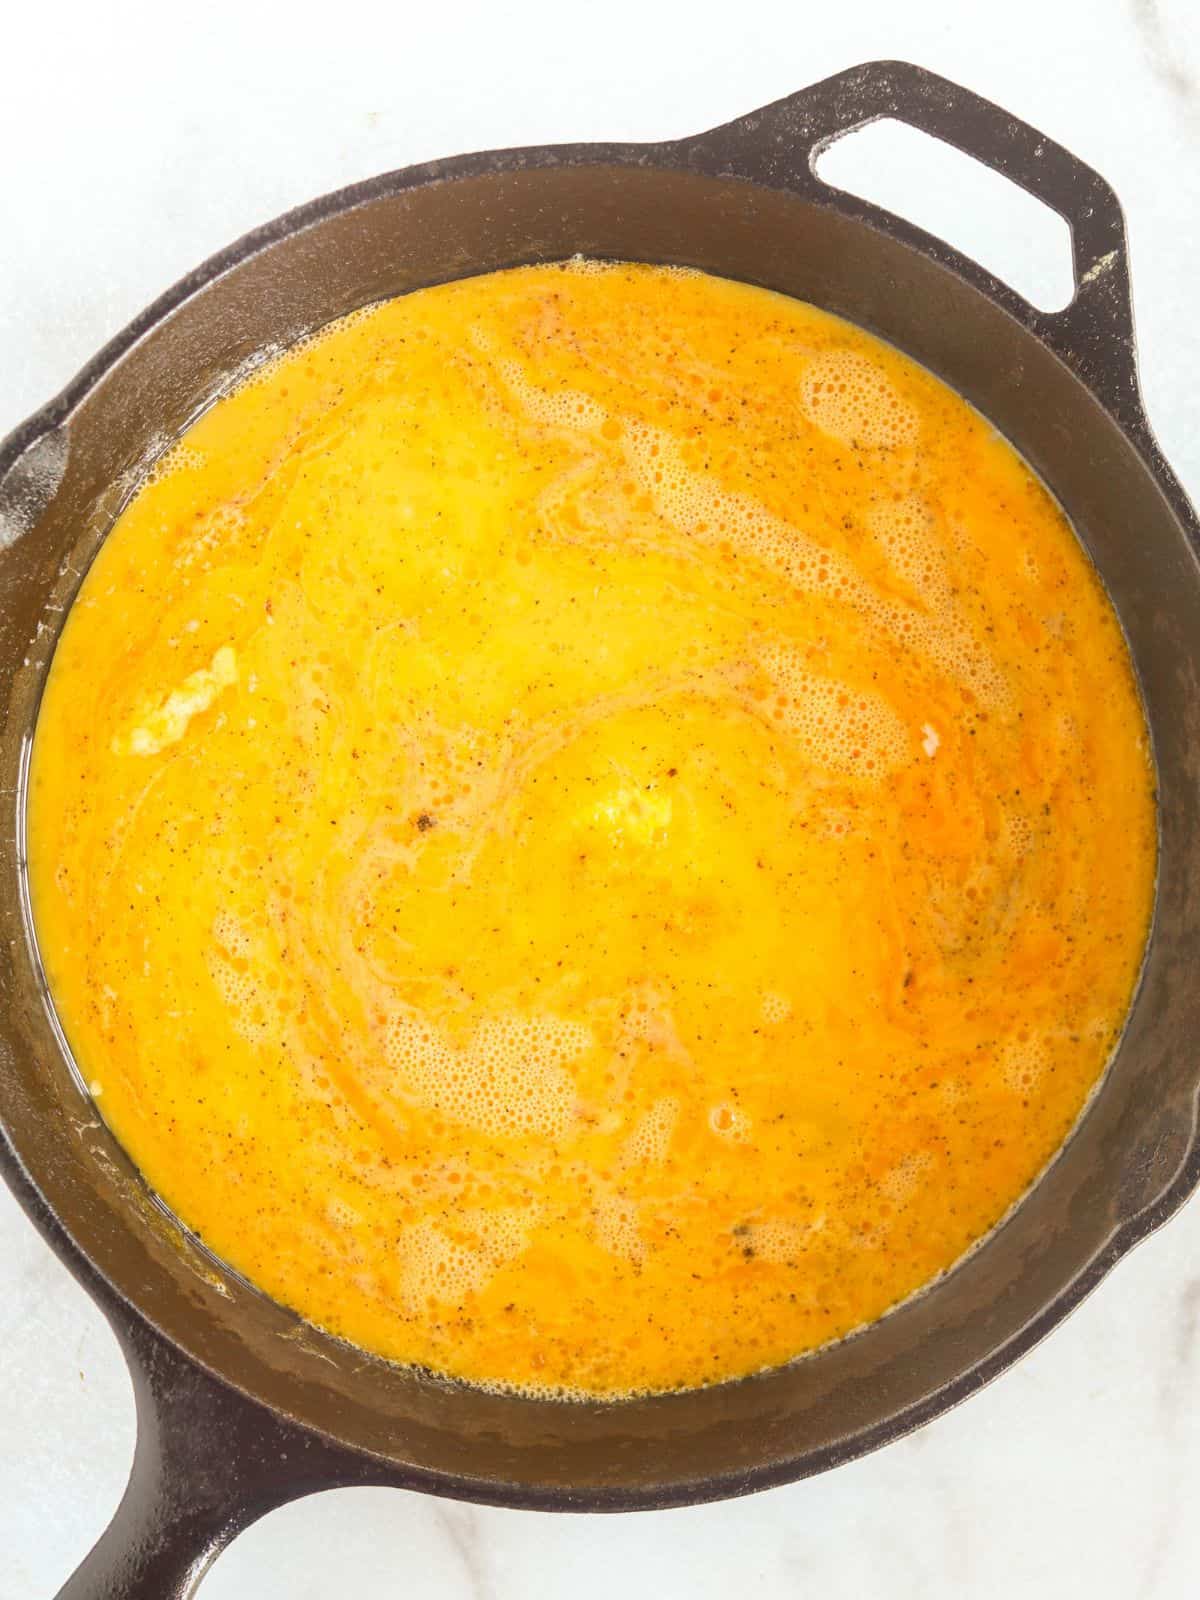 bottom of the eggs starting to set in a cast iron skillet.